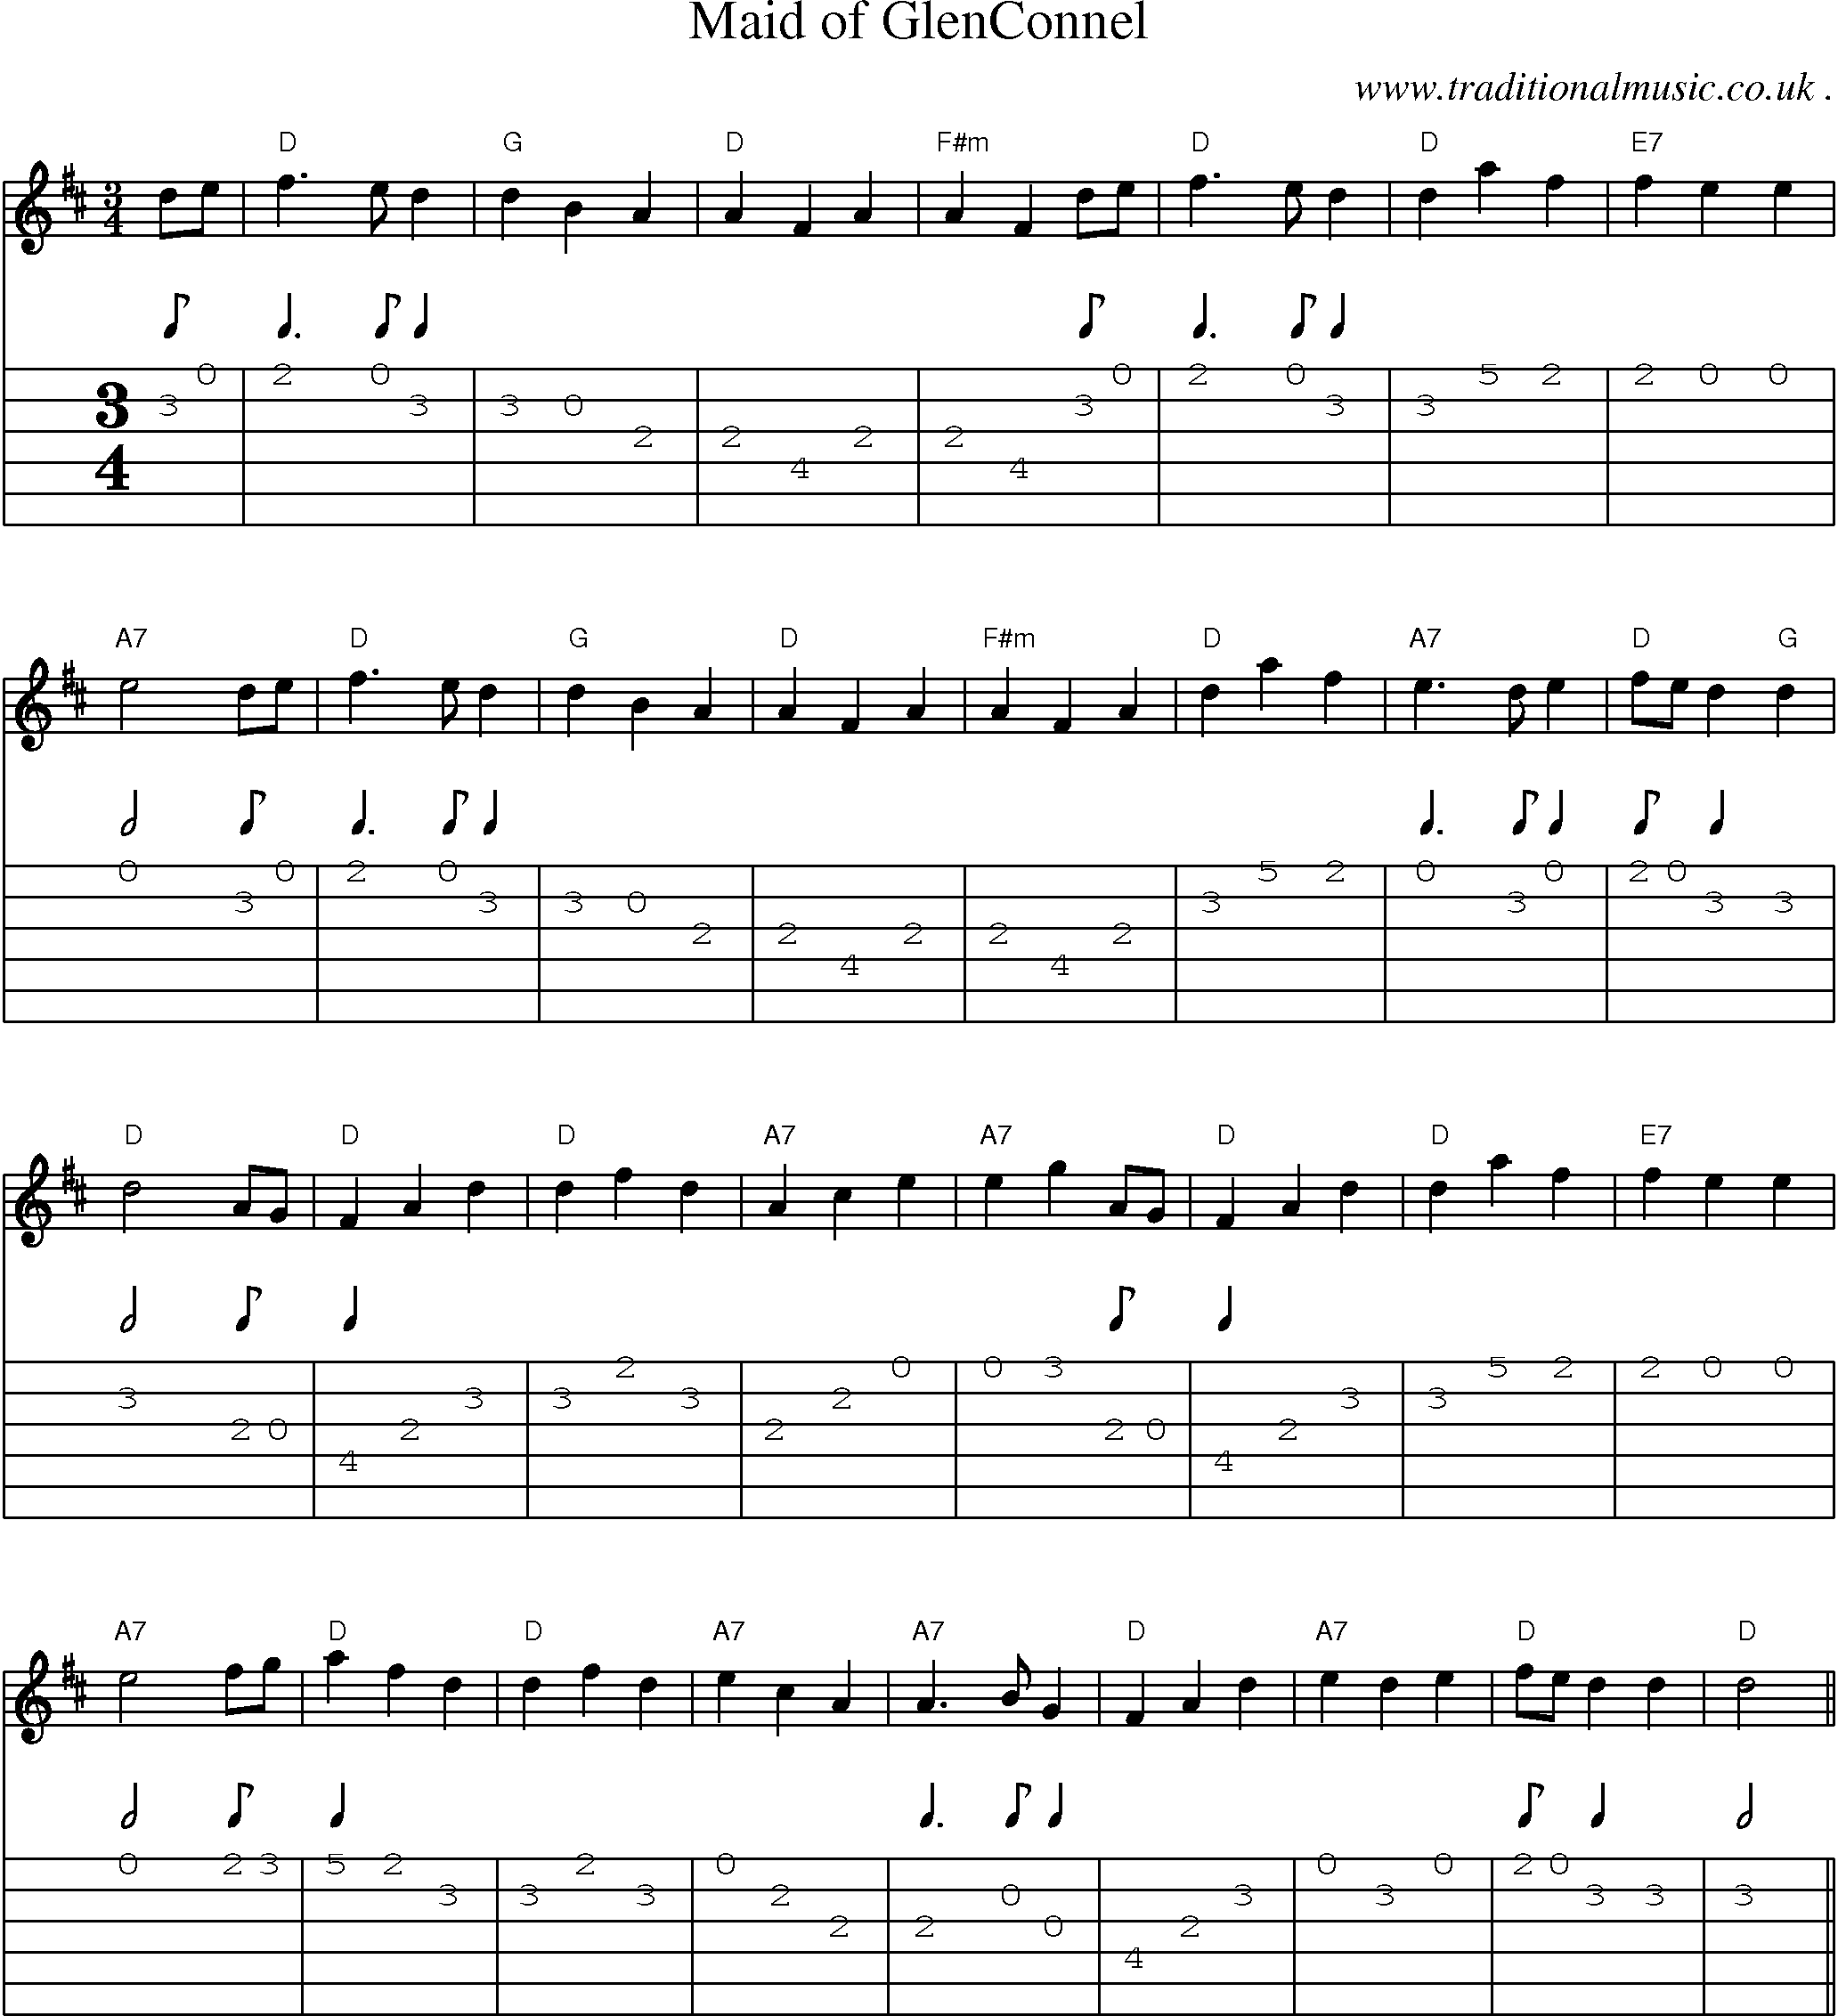 Sheet-Music and Guitar Tabs for Maid Of Glenconnel